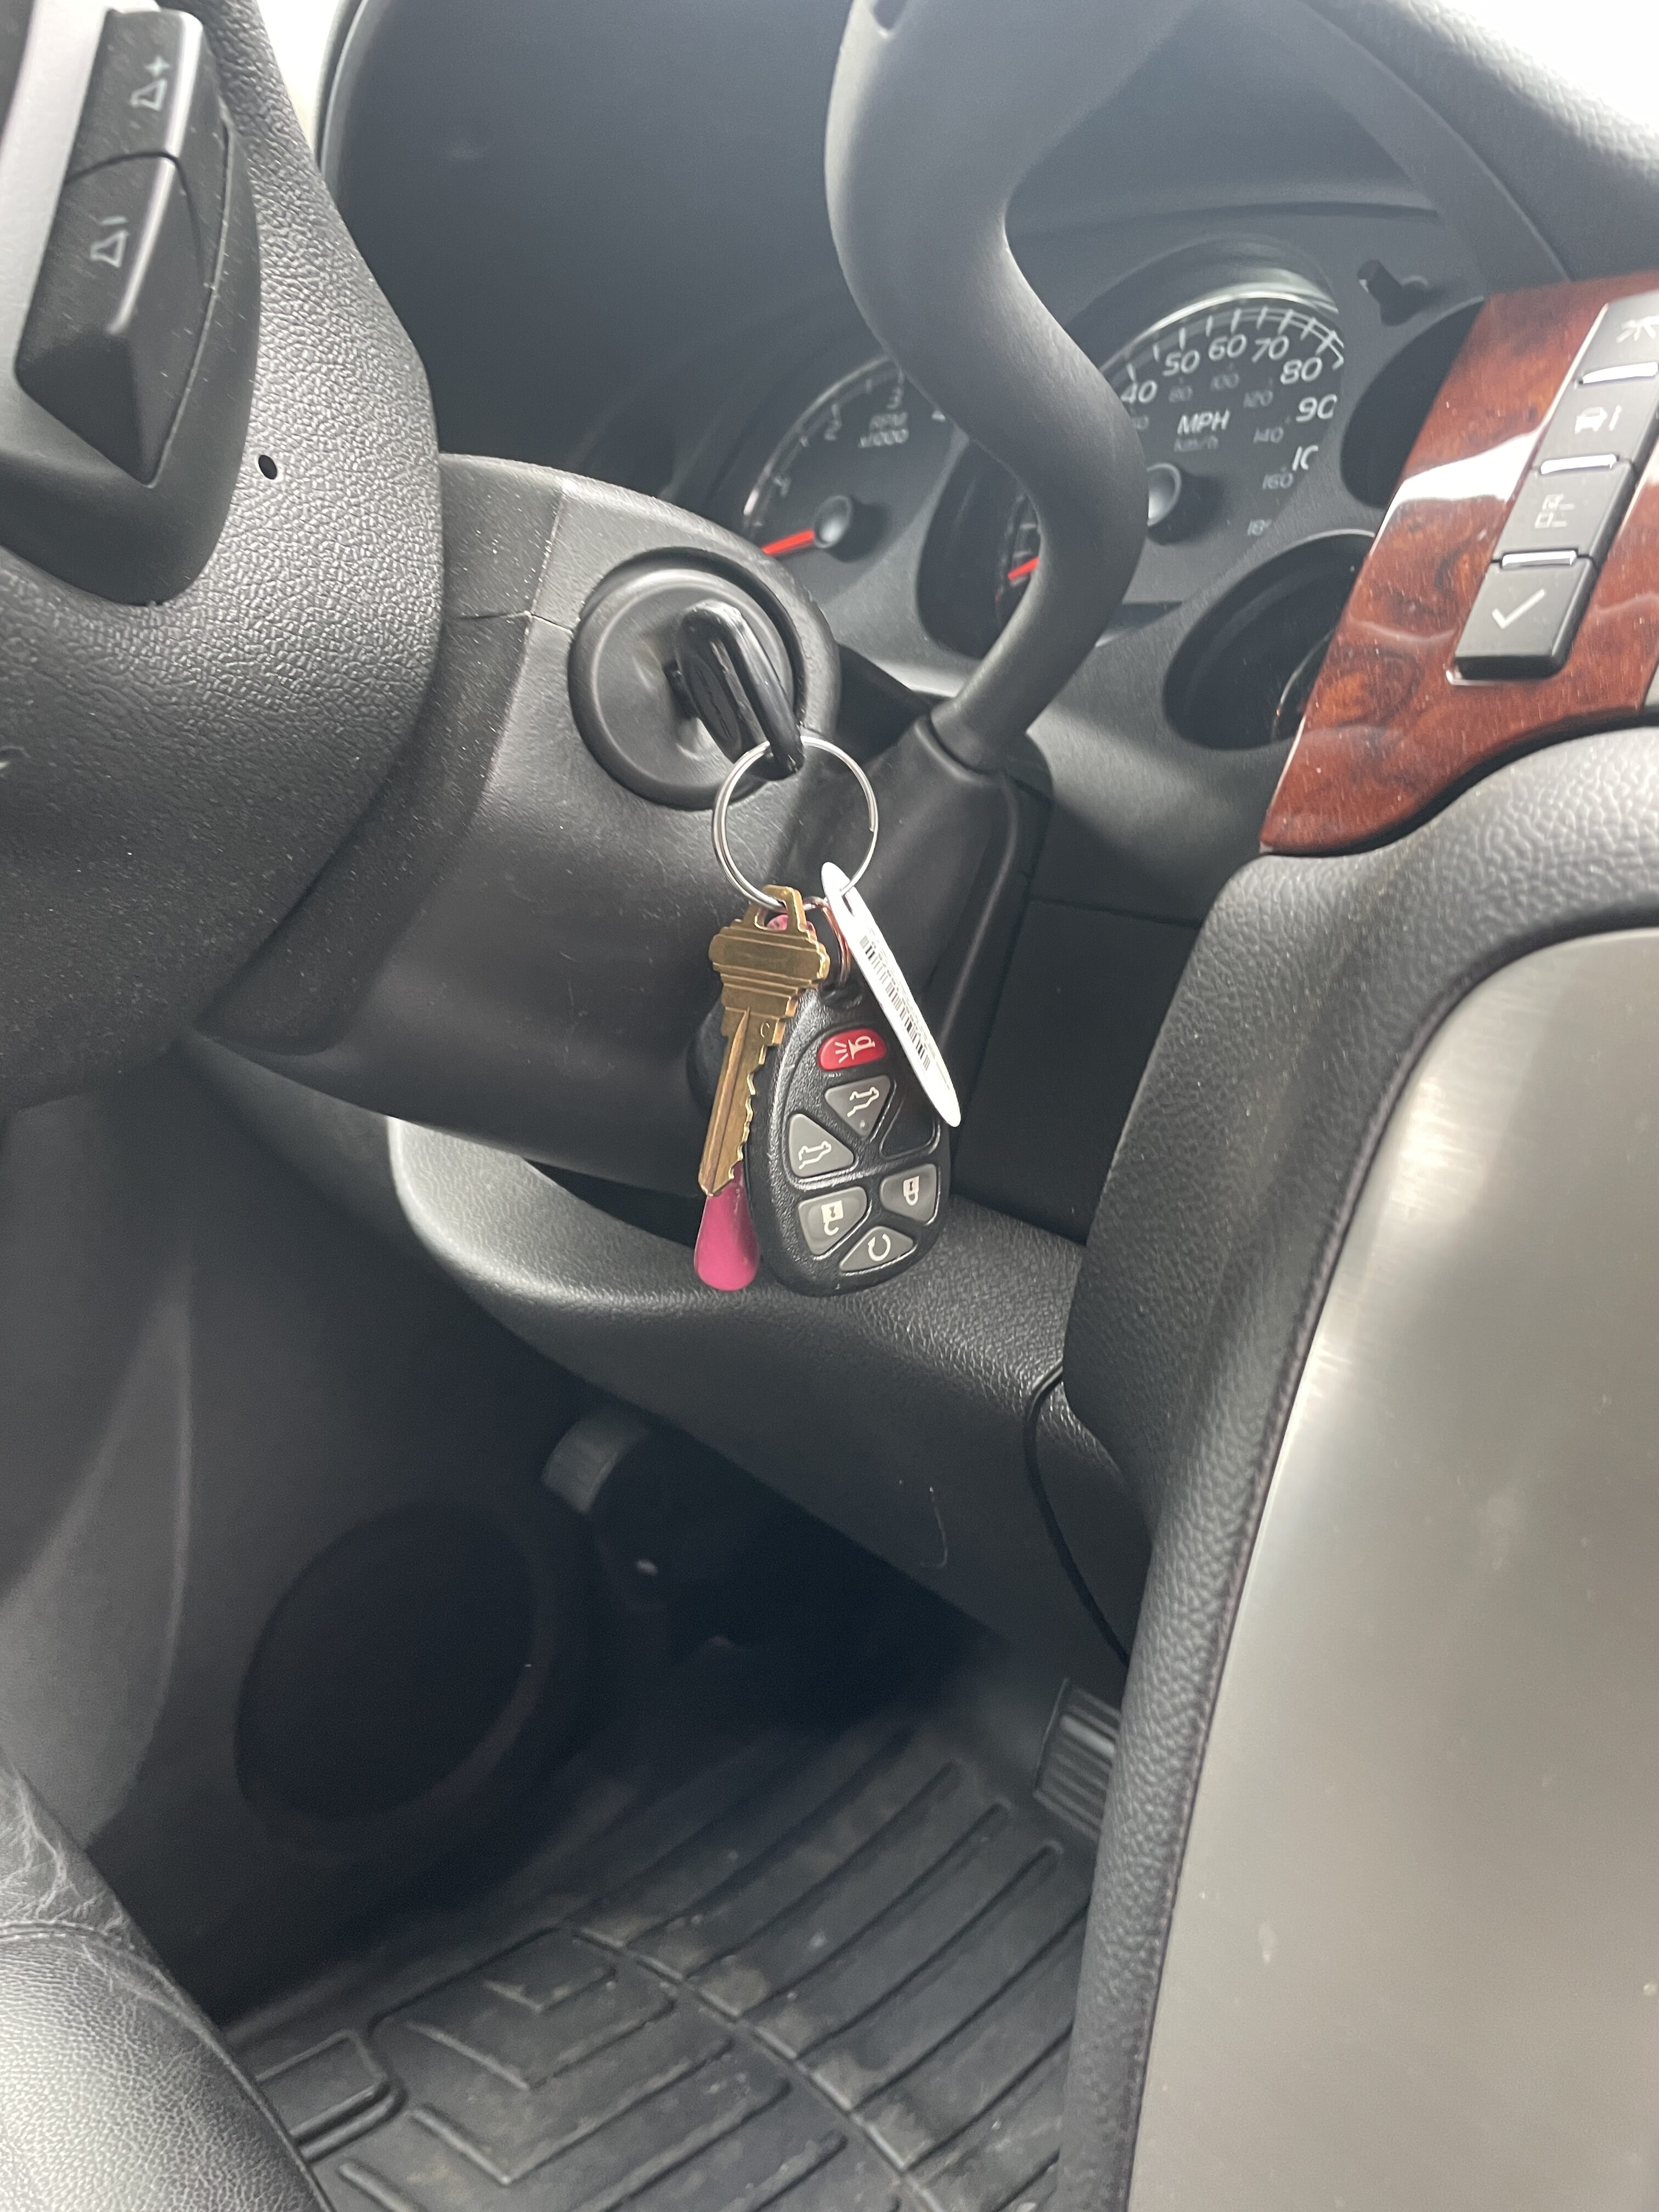 How come my car’s key won’t turn?